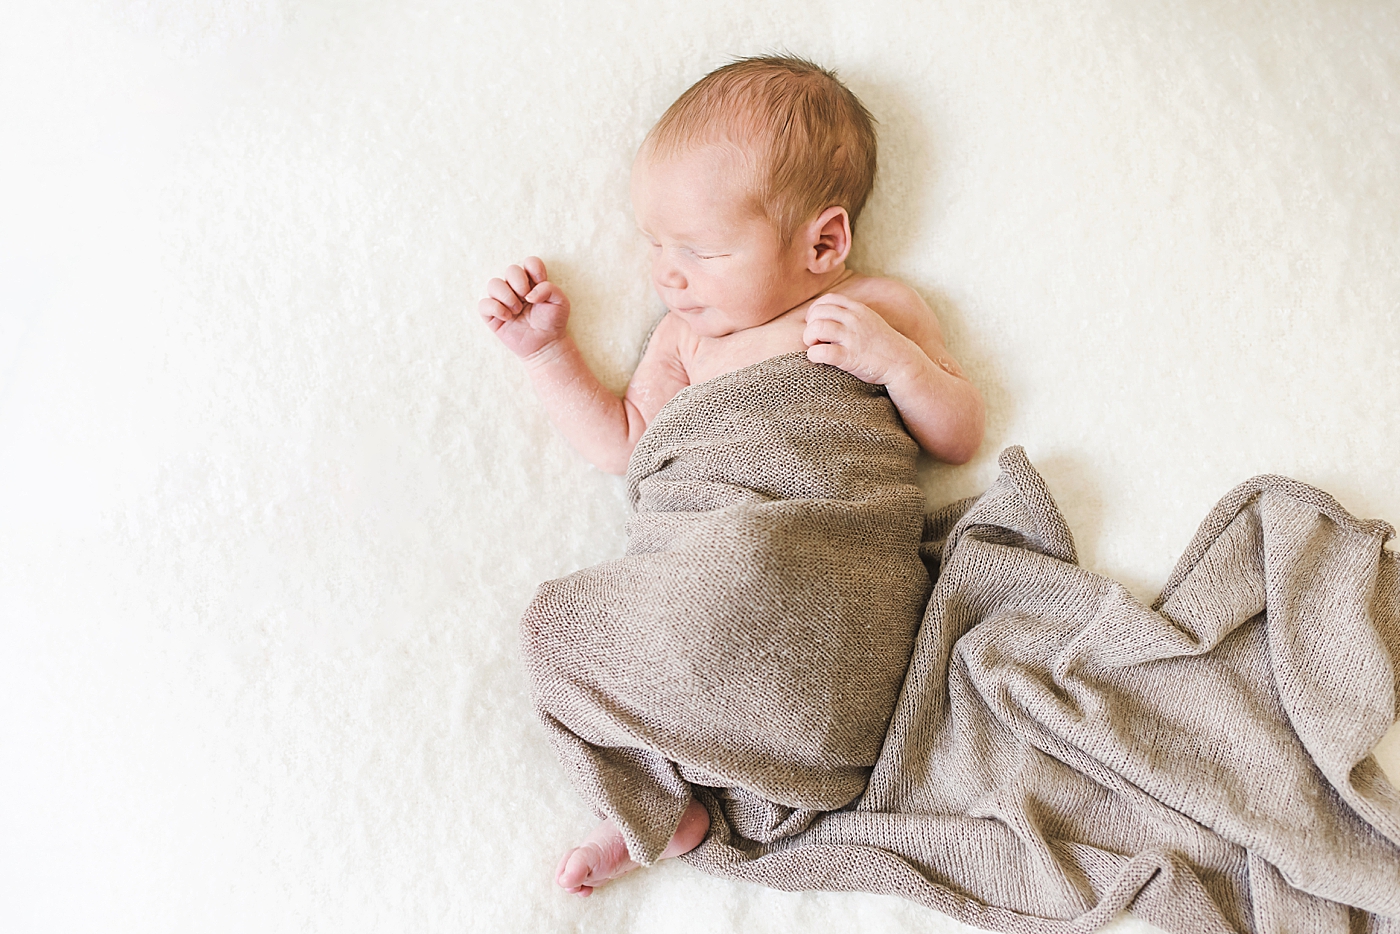 Newborn baby wrapped in tan swaddle | Photo by Anna Wisjo Photography